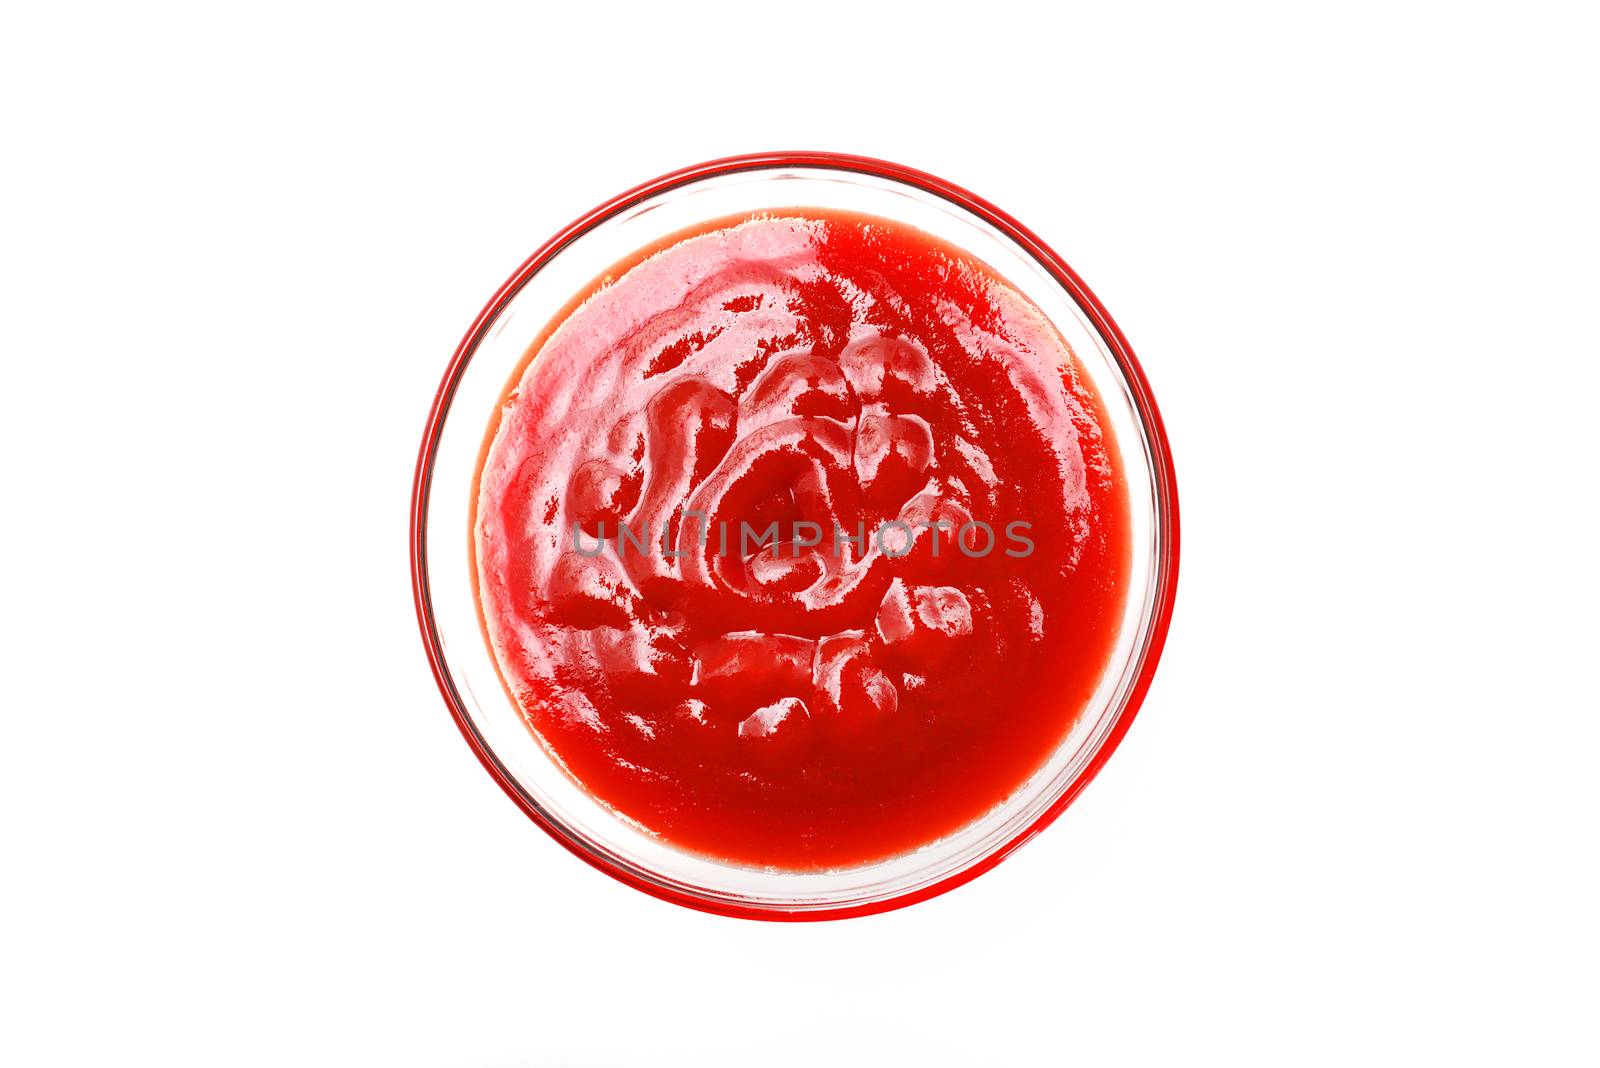 Bowl Of Ketchup Or Tomato Sauce On White Background Top View